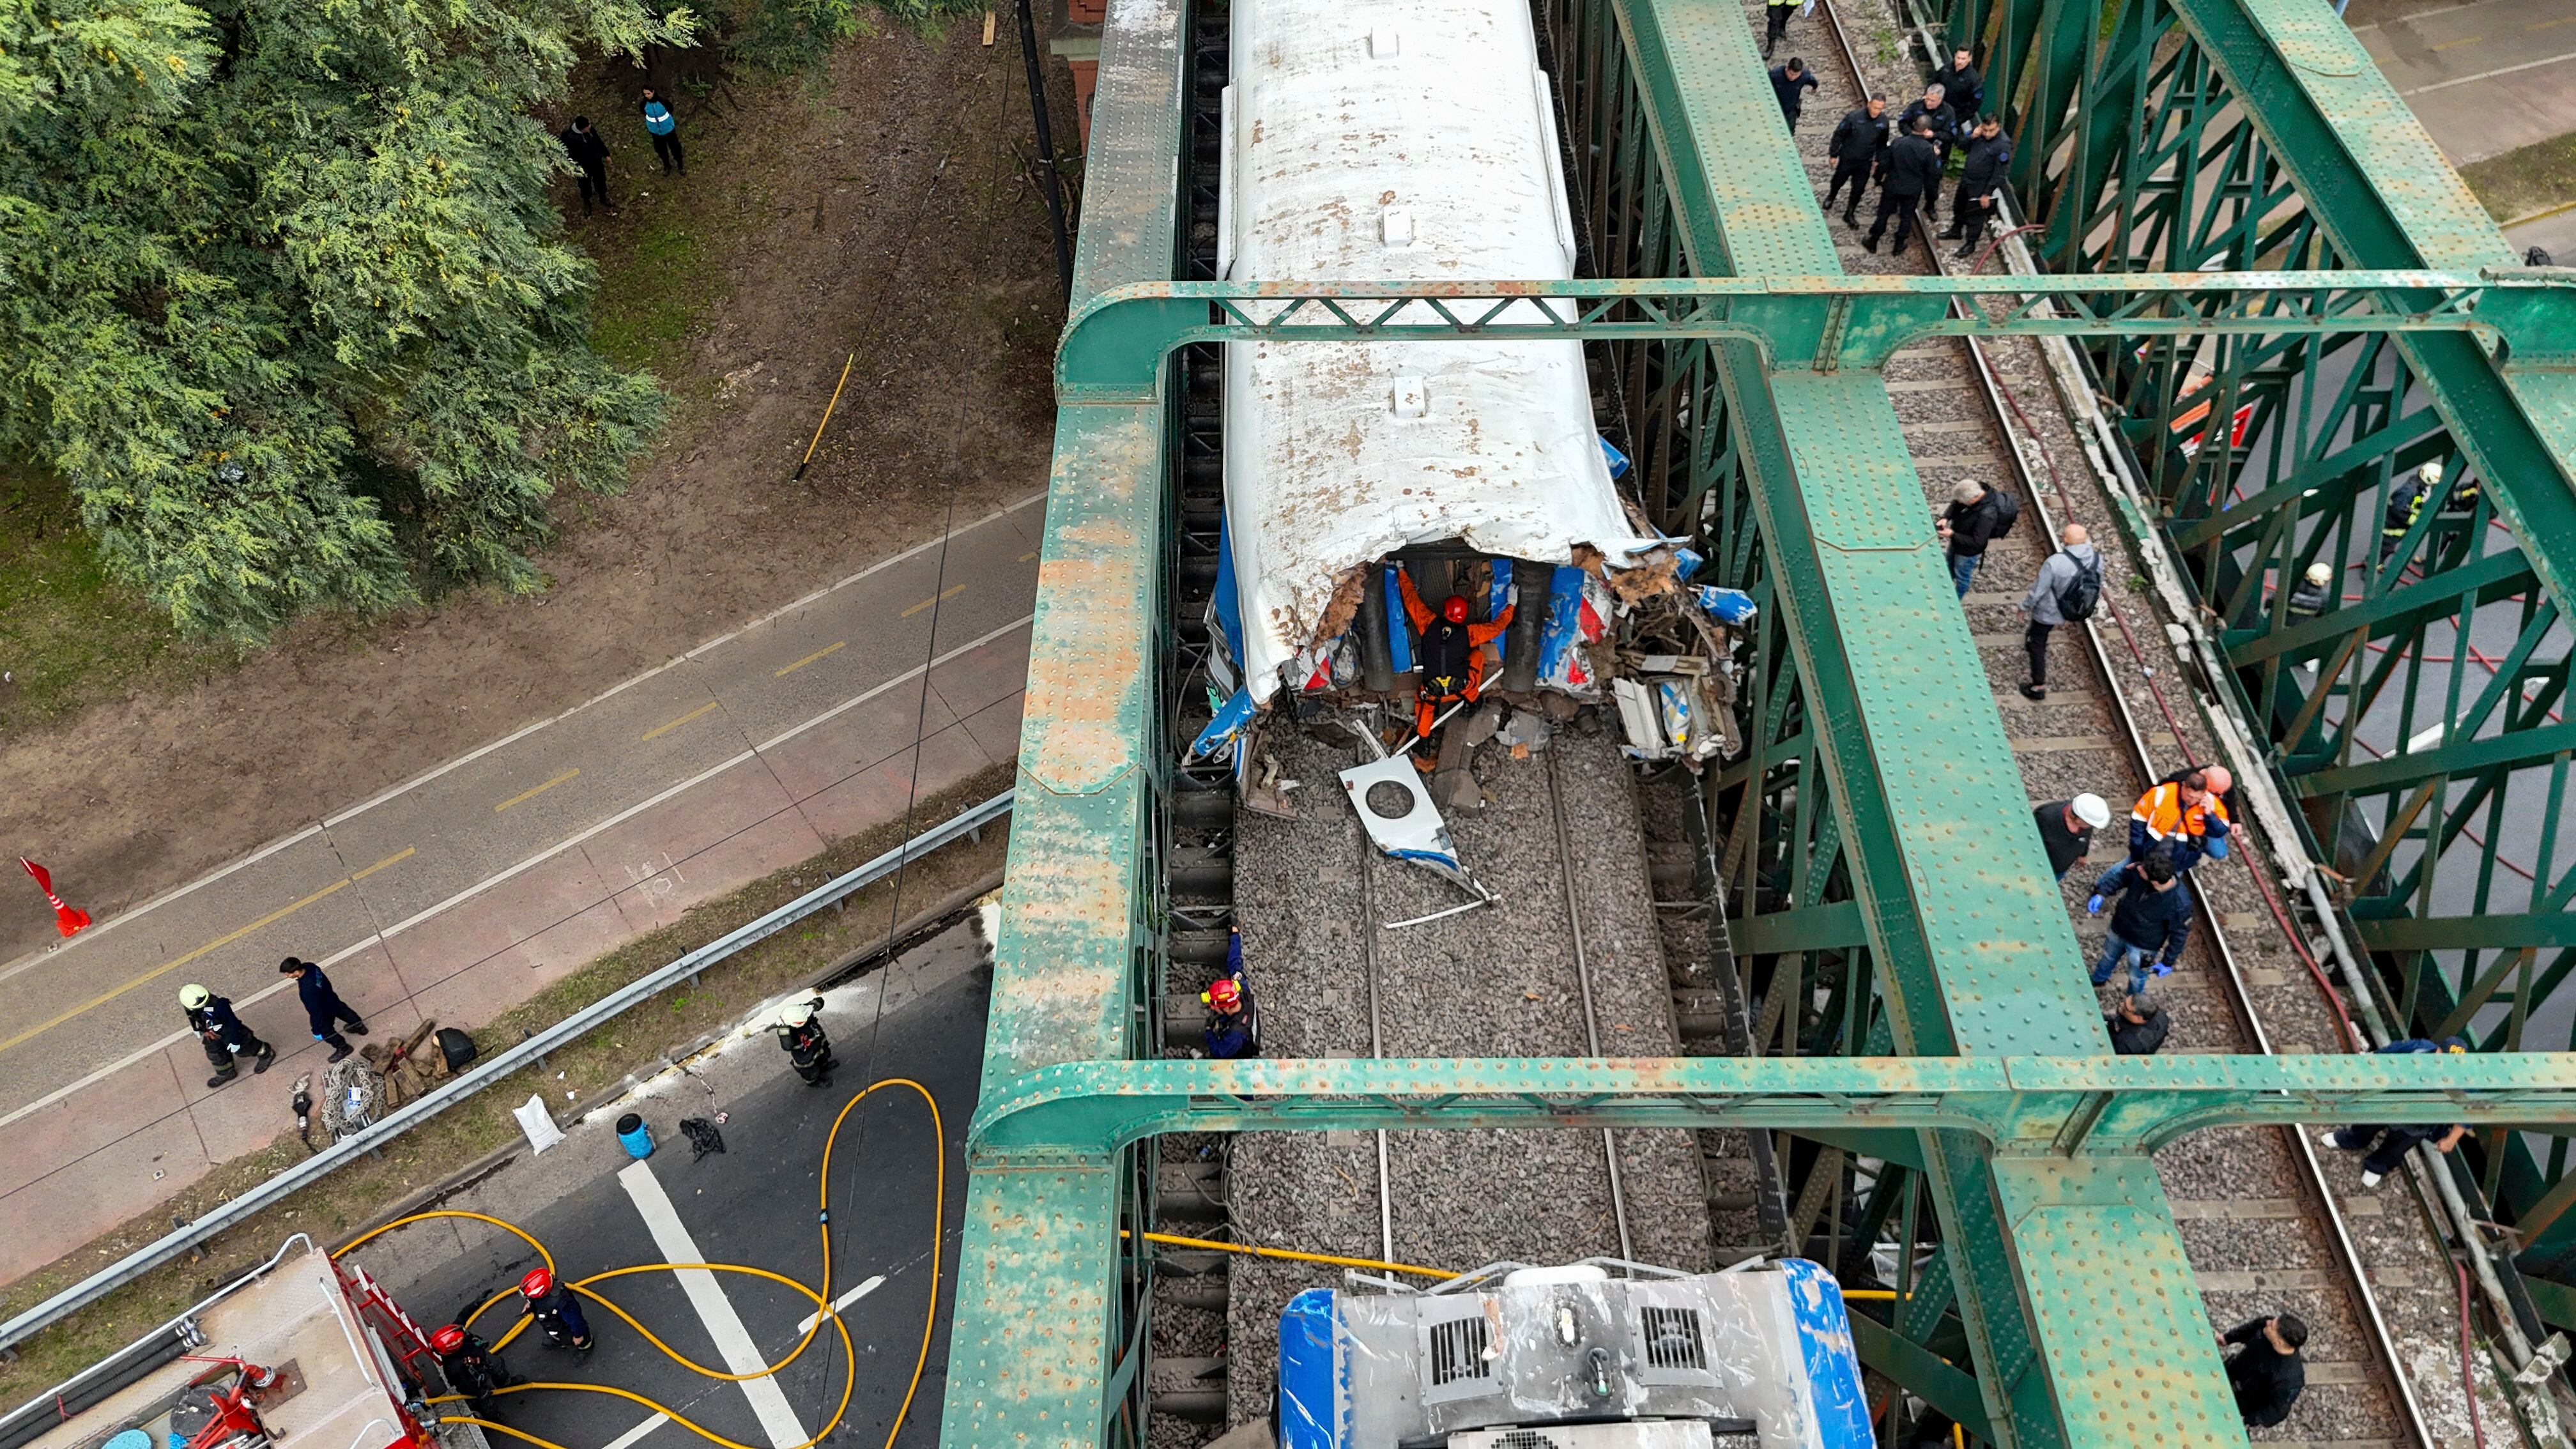 Railroad workers inspect a passenger train after it collided with another in Buenos Aires